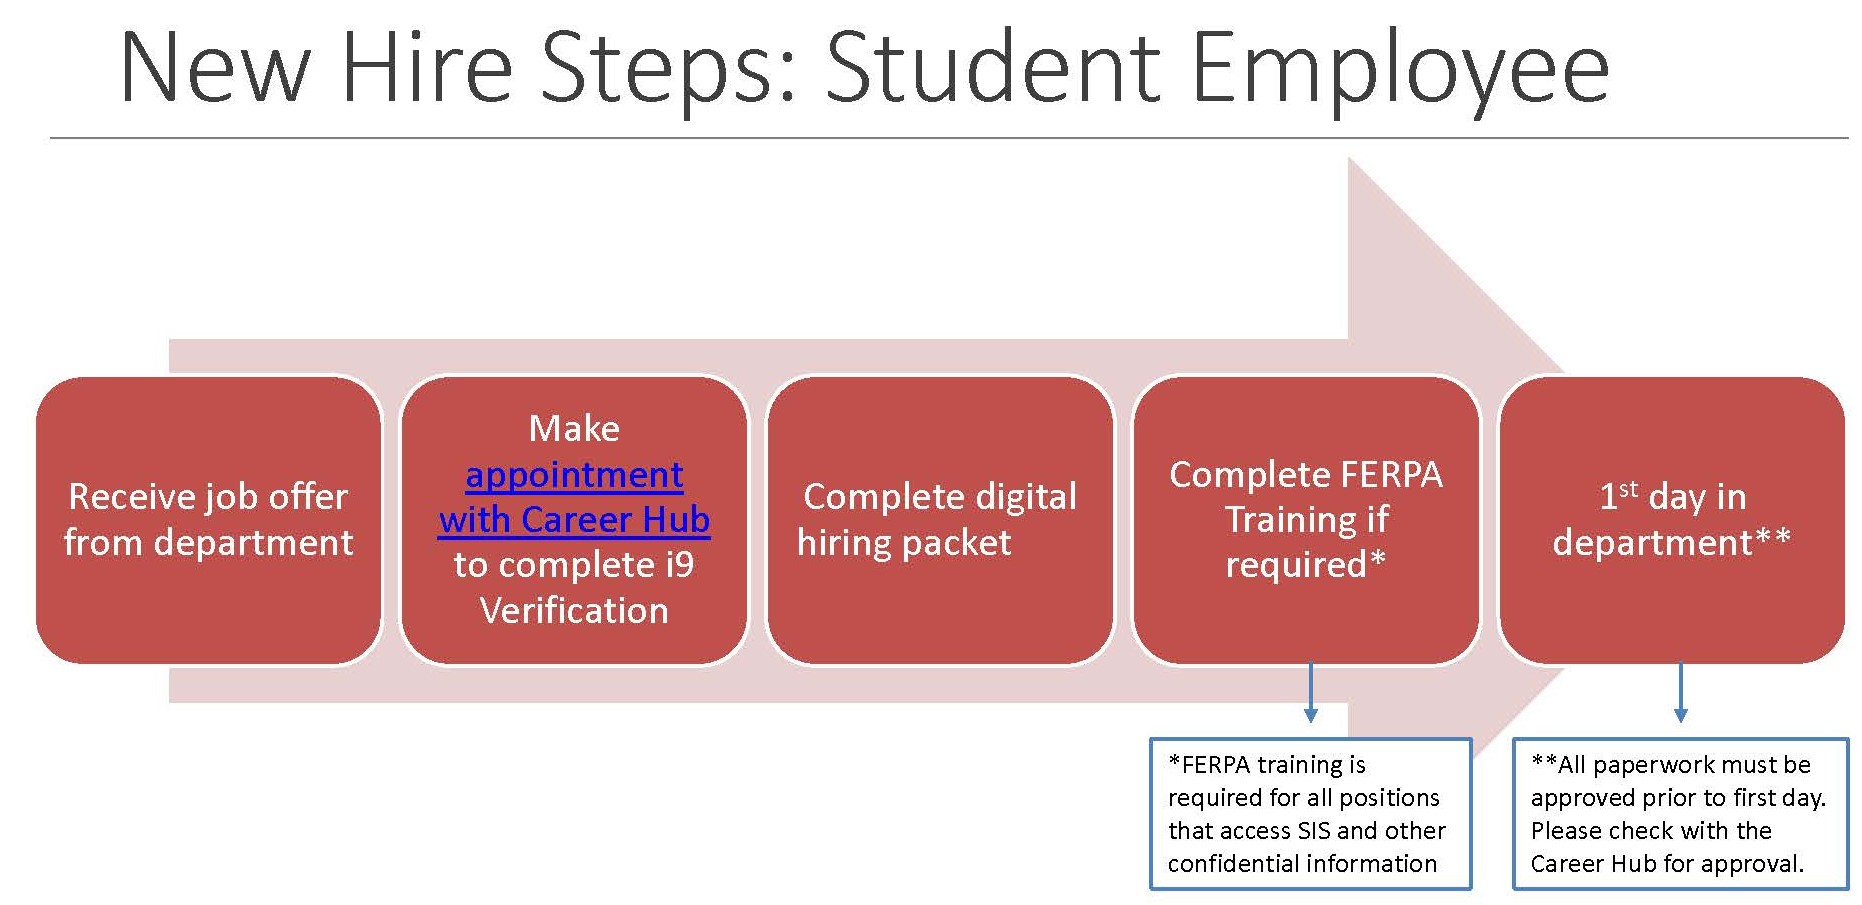 New Hire Steps for Student Employees in order of completion.